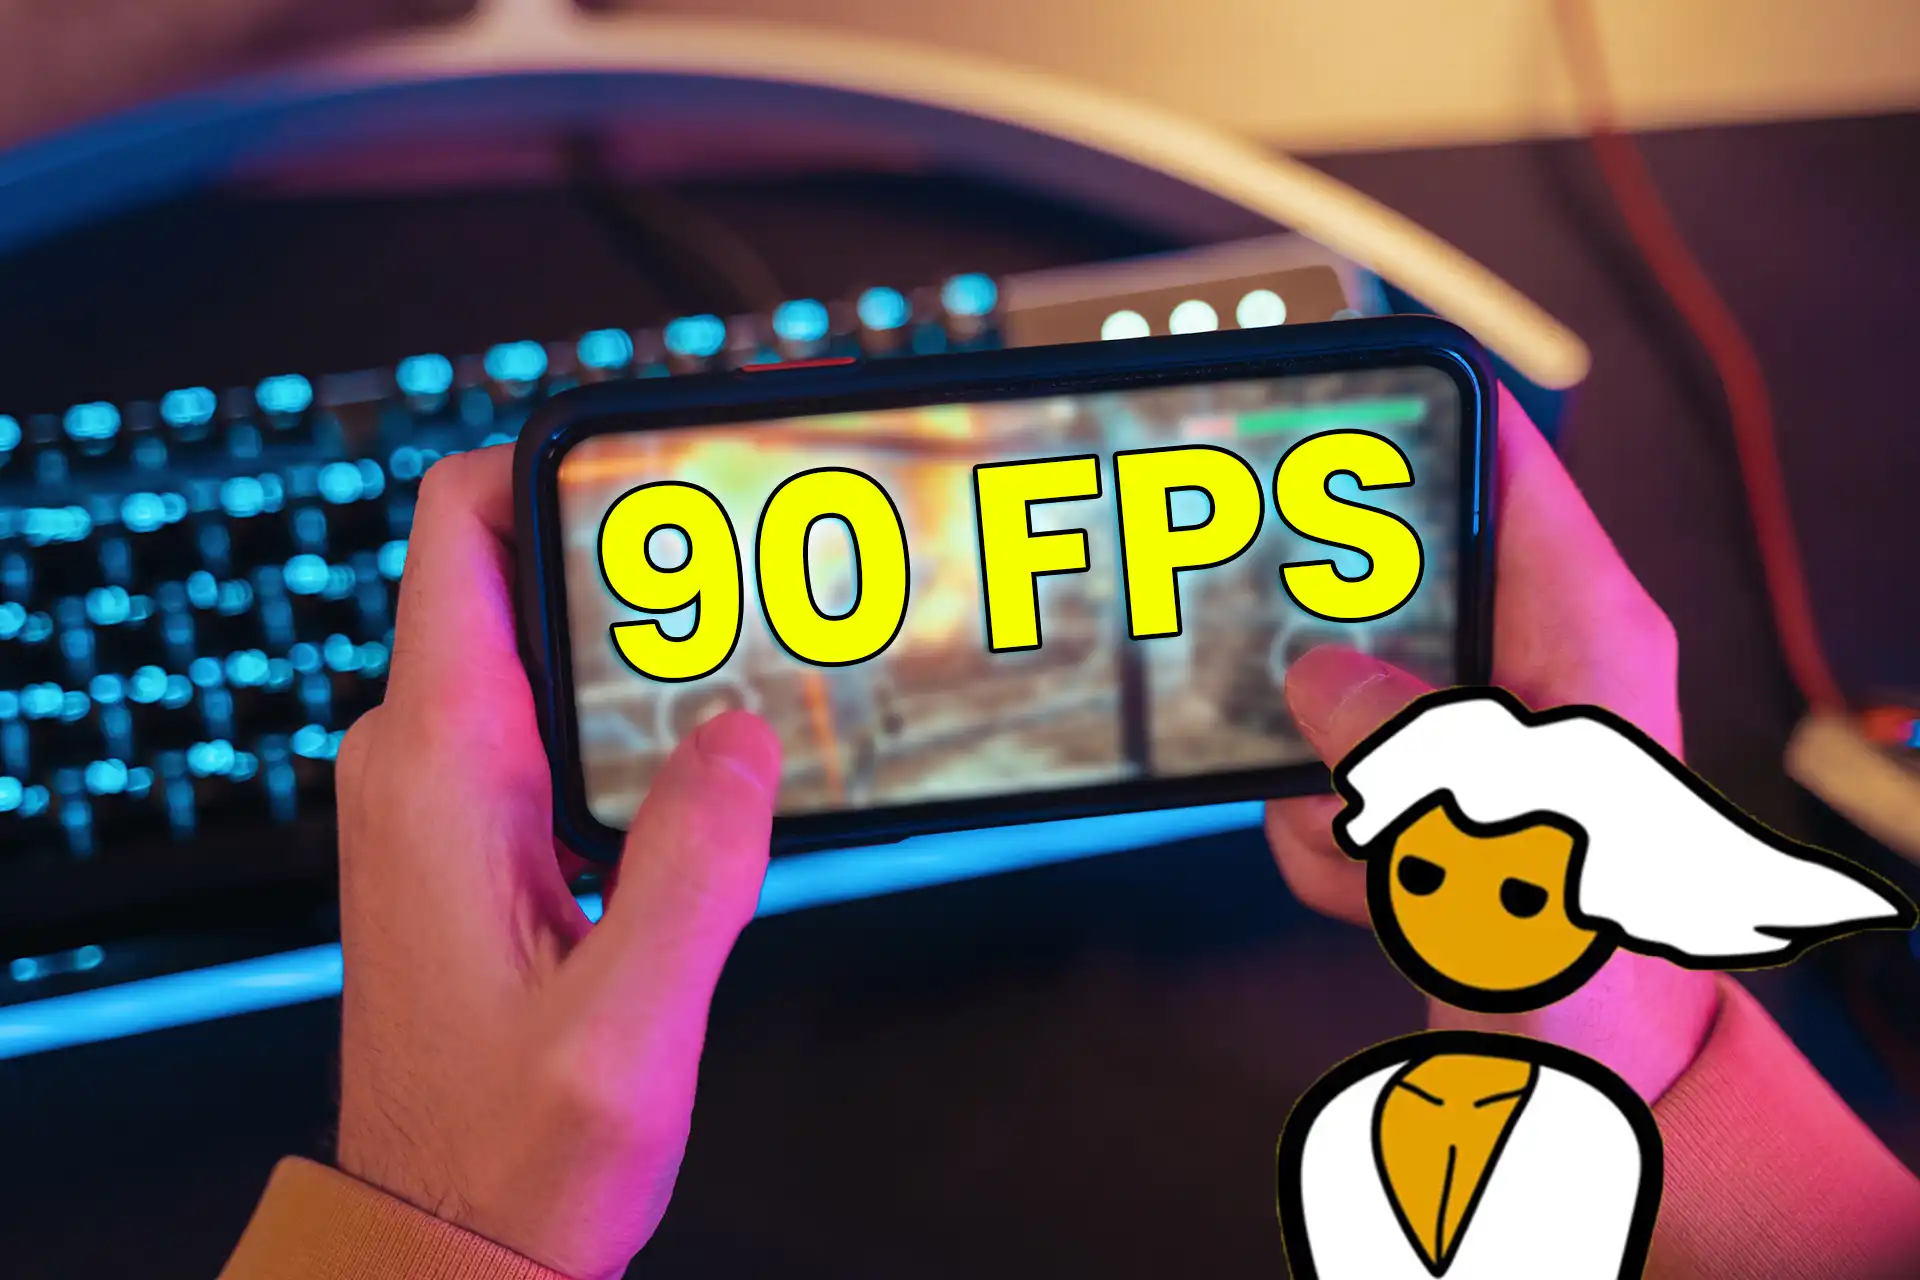 All phones that support 90 FPS in BGMI and PUBG Mobile